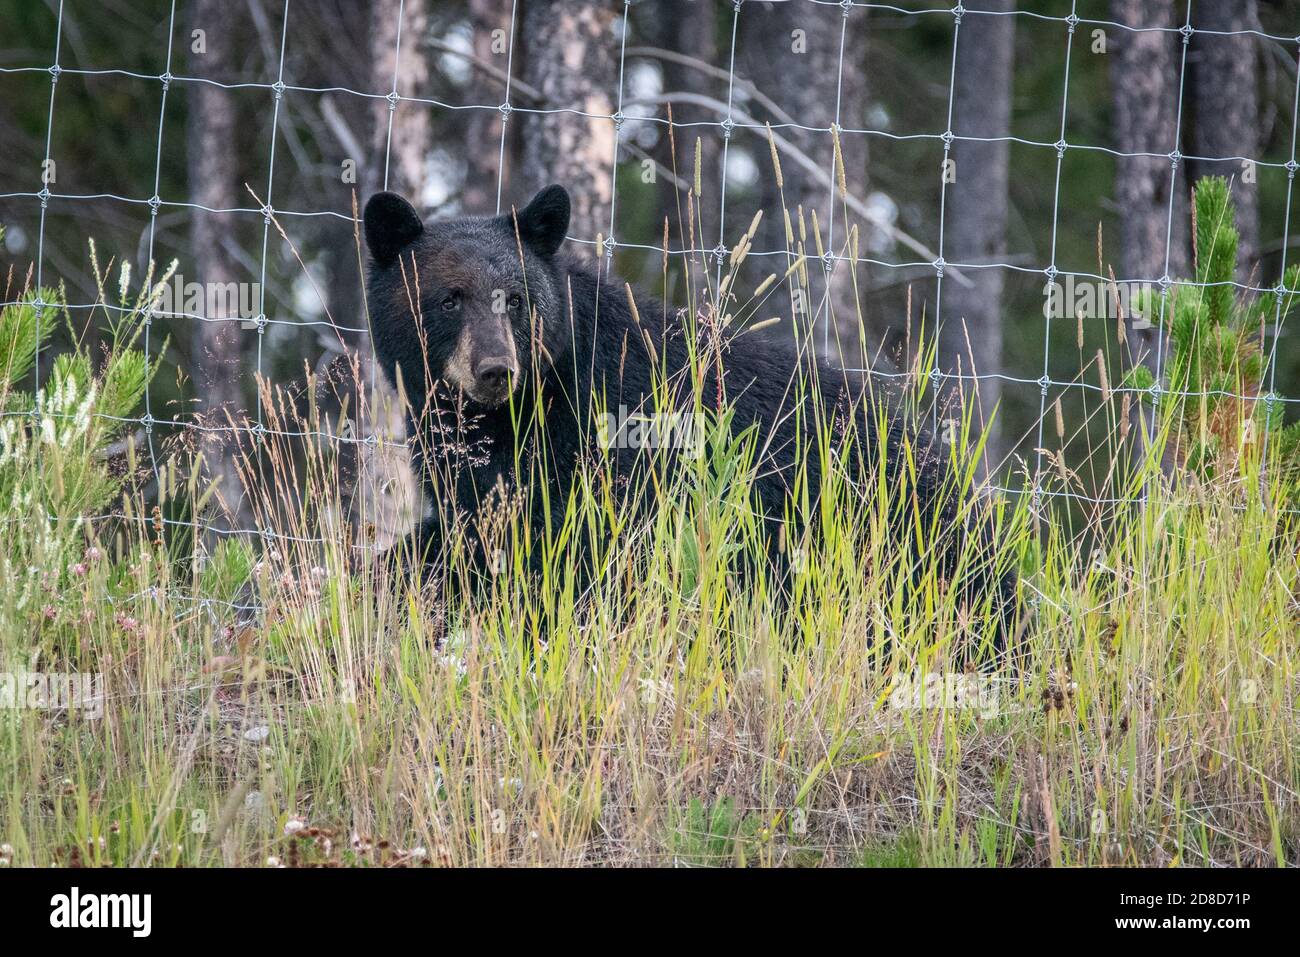 A black bear foraging for food in Canada. Stock Photo